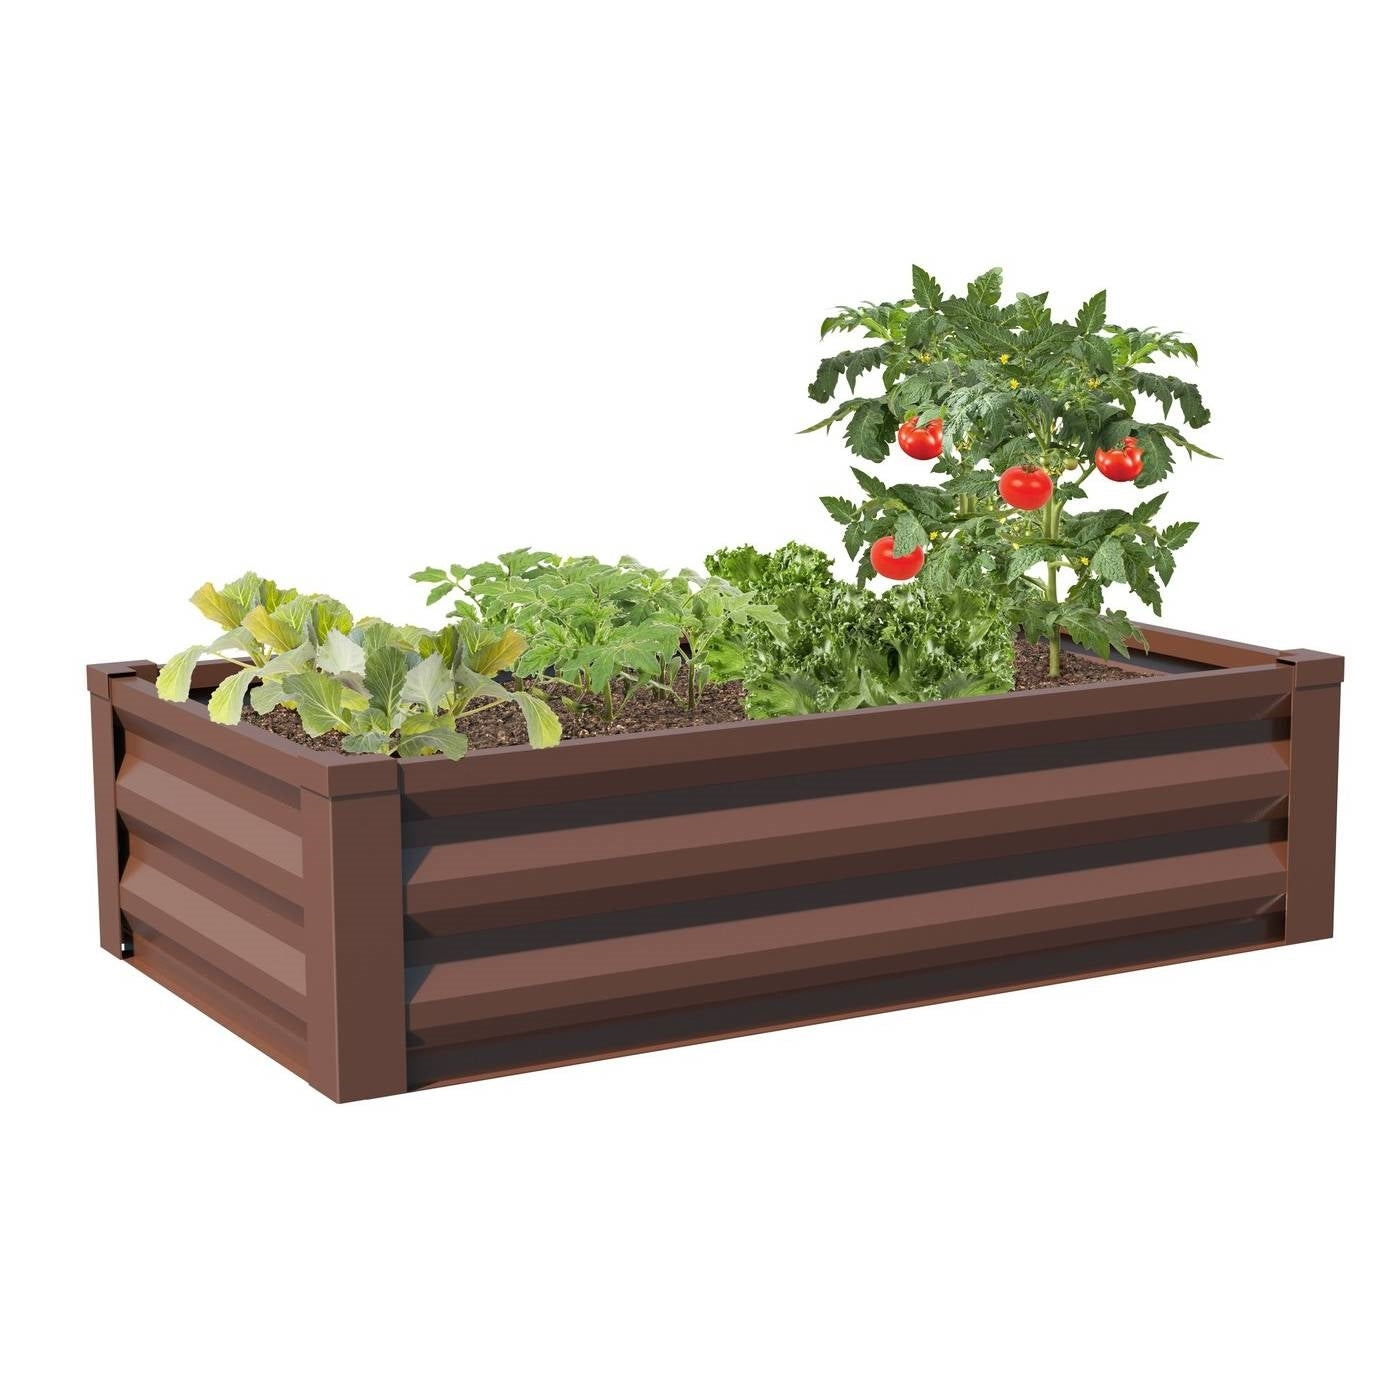 Brown Powder Coated Metal Raised Garden Bed Planter Made In USA